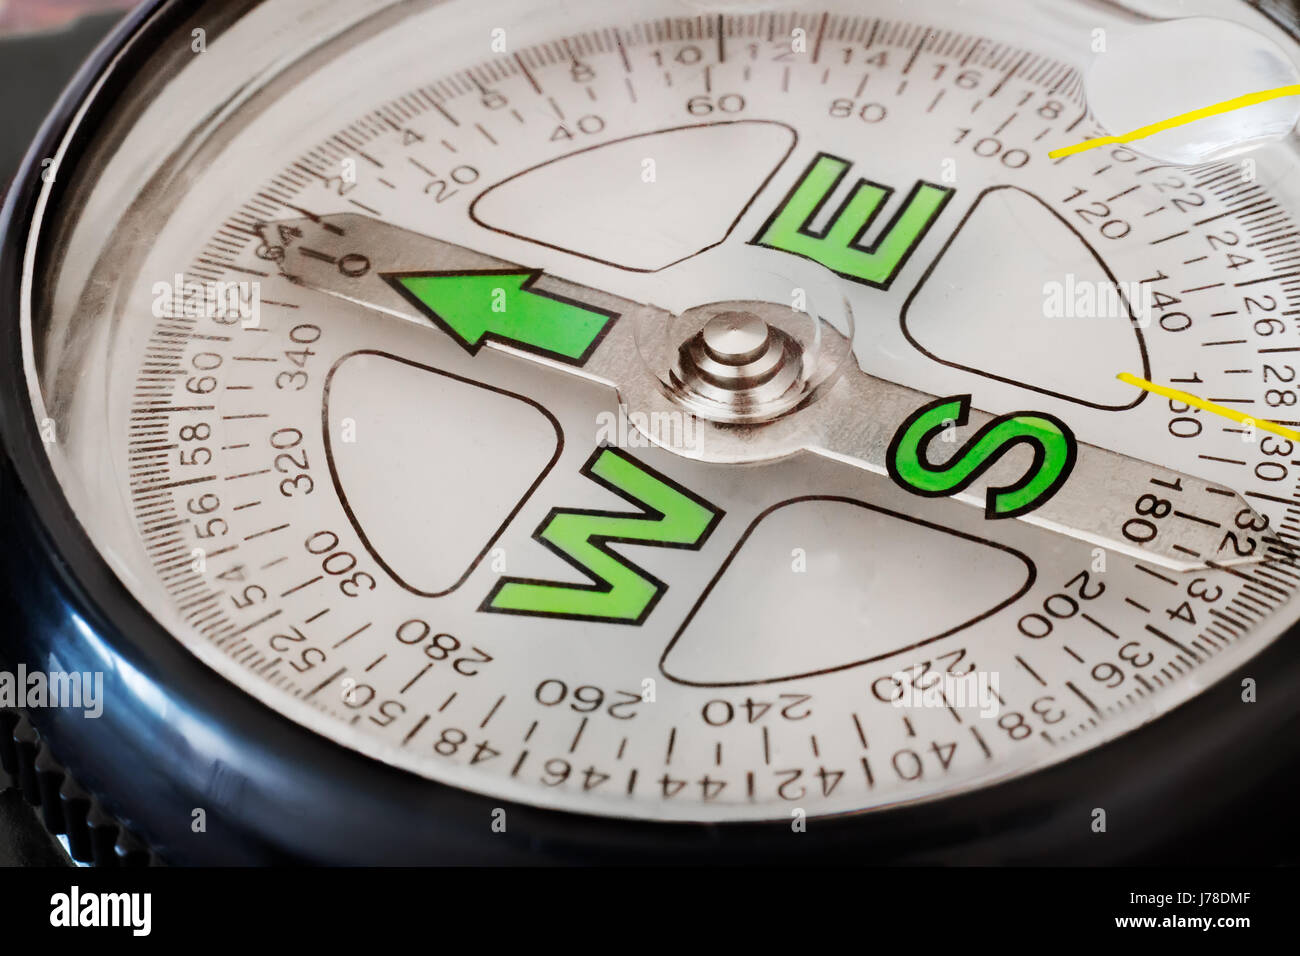 The dial of the compass indicating the cardinal points and the magnetic arrow. Presents close-up. Stock Photo